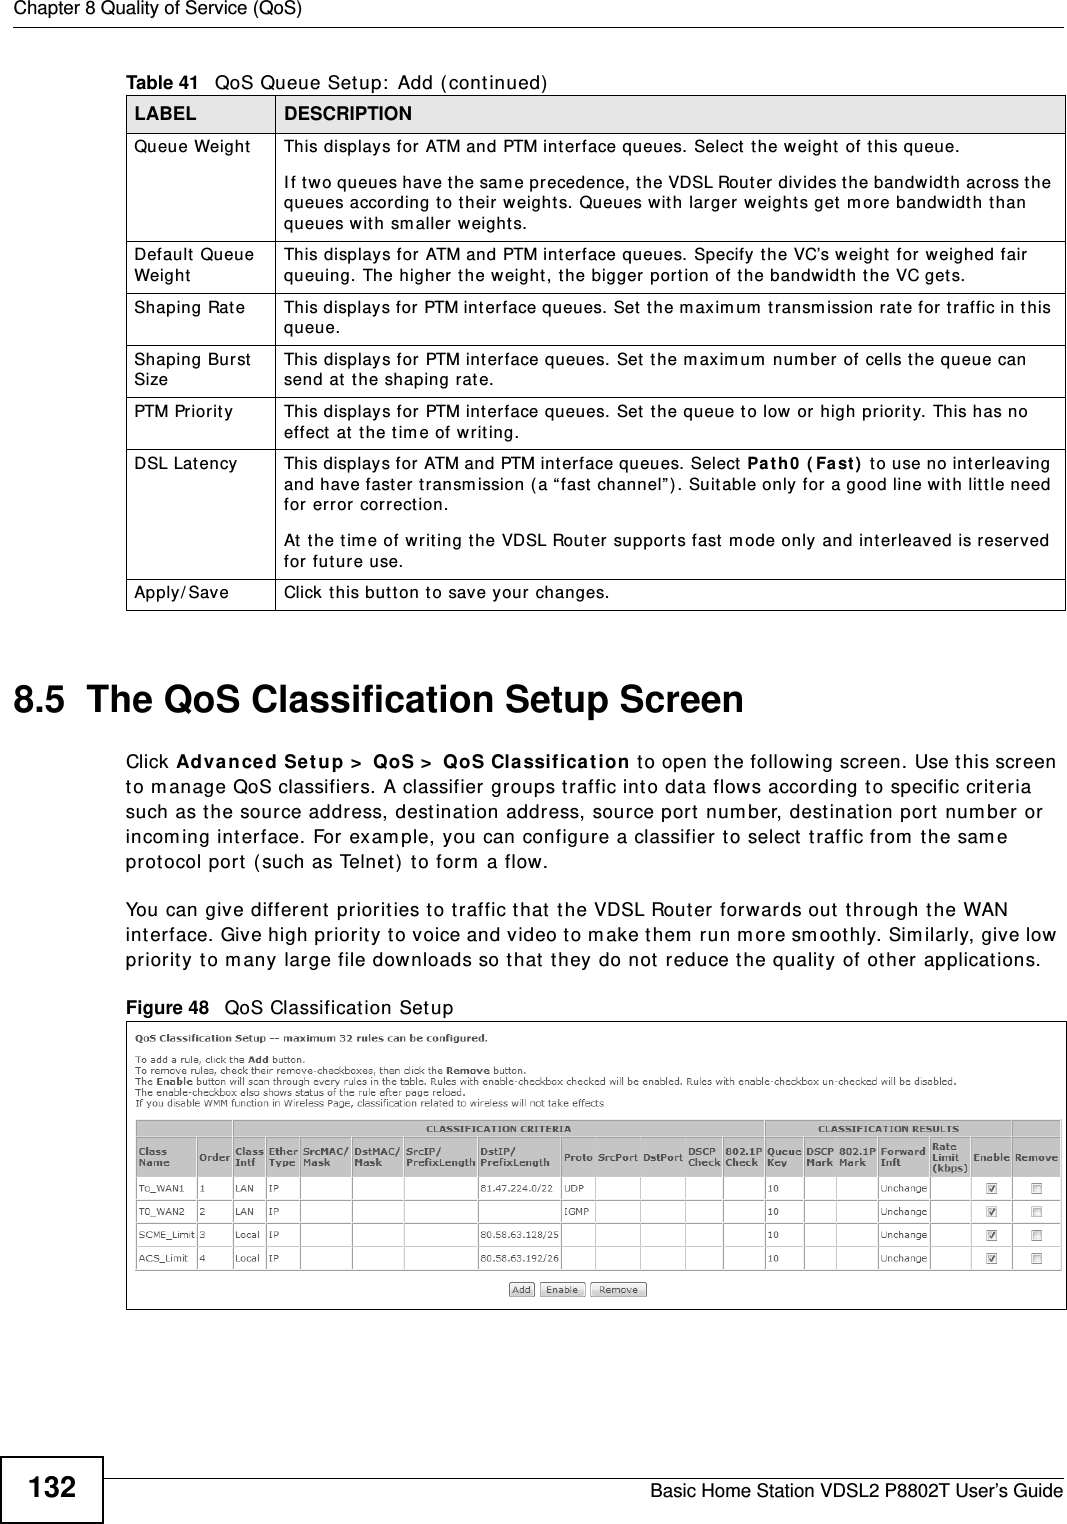 Chapter 8 Quality of Service (QoS)Basic Home Station VDSL2 P8802T User’s Guide1328.5  The QoS Classification Setup Screen Click Advance d Set u p &gt;  QoS &gt;  QoS Classification to open the following screen. Use t his screen to m anage QoS classifiers. A classifier groups traffic into data flow s according to specific crit eria such as the source address, dest ination address, source port num ber, destination port num ber or incom ing int erface. For exam ple, you can configure a classifier t o select  t raffic from the sam e prot ocol port  ( such as Telnet) to form  a flow.You can give different priorit ies t o t raffic t hat  the VDSL Router forwards out  through the WAN int erface. Give high priorit y t o voice and video t o m ake them run m ore sm oothly. Similarly, give low priority to many large file dow nloads so t hat  t hey do not reduce t he quality of ot her  applicat ions. Figure 48   QoS Classificat ion Setup Queue Weight This displays for ATM and PTM interface queues. Select  t he weight of this queue. I f t wo queues have the same precedence, the VDSL Router divides the bandwidth across t he queues according t o their weights. Queues wit h larger  w eight s get  m ore bandwidth than queues wit h sm aller  w eights.Default  Queue Weig htThis displays for ATM and PTM interface queues. Specify the VC’s weight for weighed fair queuing. The higher  t he weight , t he bigger por tion of t he bandwidth the VC get s.Shaping Rate  This displays for  PTM interface queues. Set  the m axim um  t ransm ission rate for traffic in this queue.Shaping Burst  SizeThis displays for PTM interface queues. Set  the m aximum  num ber of cells the queue can send at  t he shaping rat e.PTM Priorit y This displays for PTM int er face queues. Set  the queue t o low or high pr iority. This has no effect  at the time of writing.DSL Latency This displays for ATM and PTM int er face queues. Select  Pa t h0  ( Fa st )  to use no int erleaving and have fast er transm ission (a “ fast  channel”) . Suit able only for a good line with litt le need for error corr ect ion.At  t he t im e of writing the VDSL Router supports fast  m ode only and interleaved is reserved for fut ure use. Apply/ Save Click this butt on to save your changes.Table 41   QoS Queue Setup:  Add (continued)LABEL DESCRIPTION